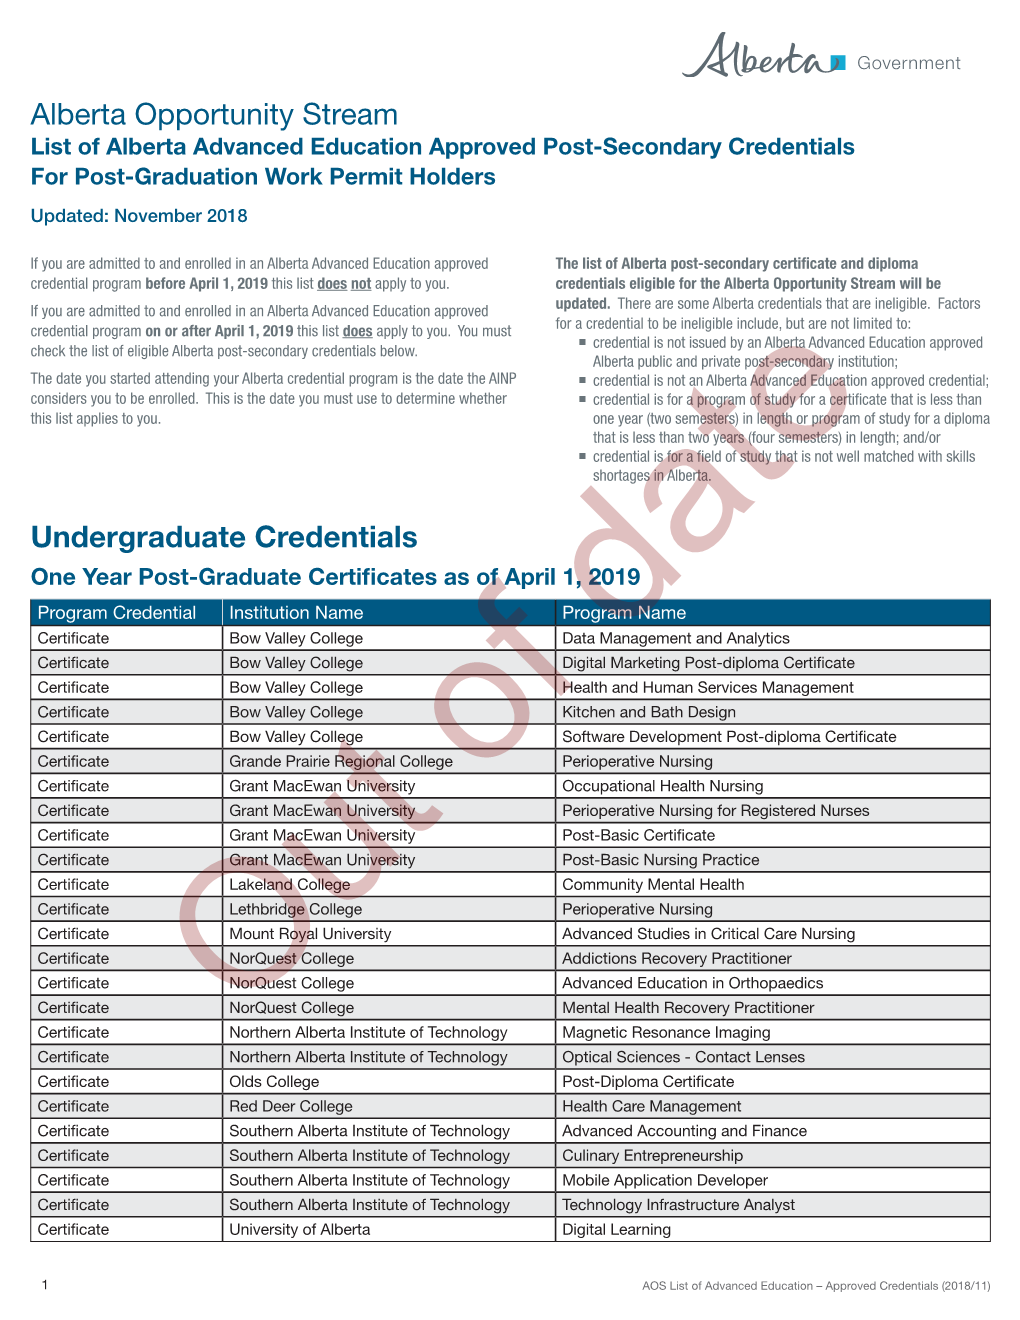 AINP ƒƒ Credential Is Not an Alberta Advanced Education Approved Credential; Considers You to Be Enrolled